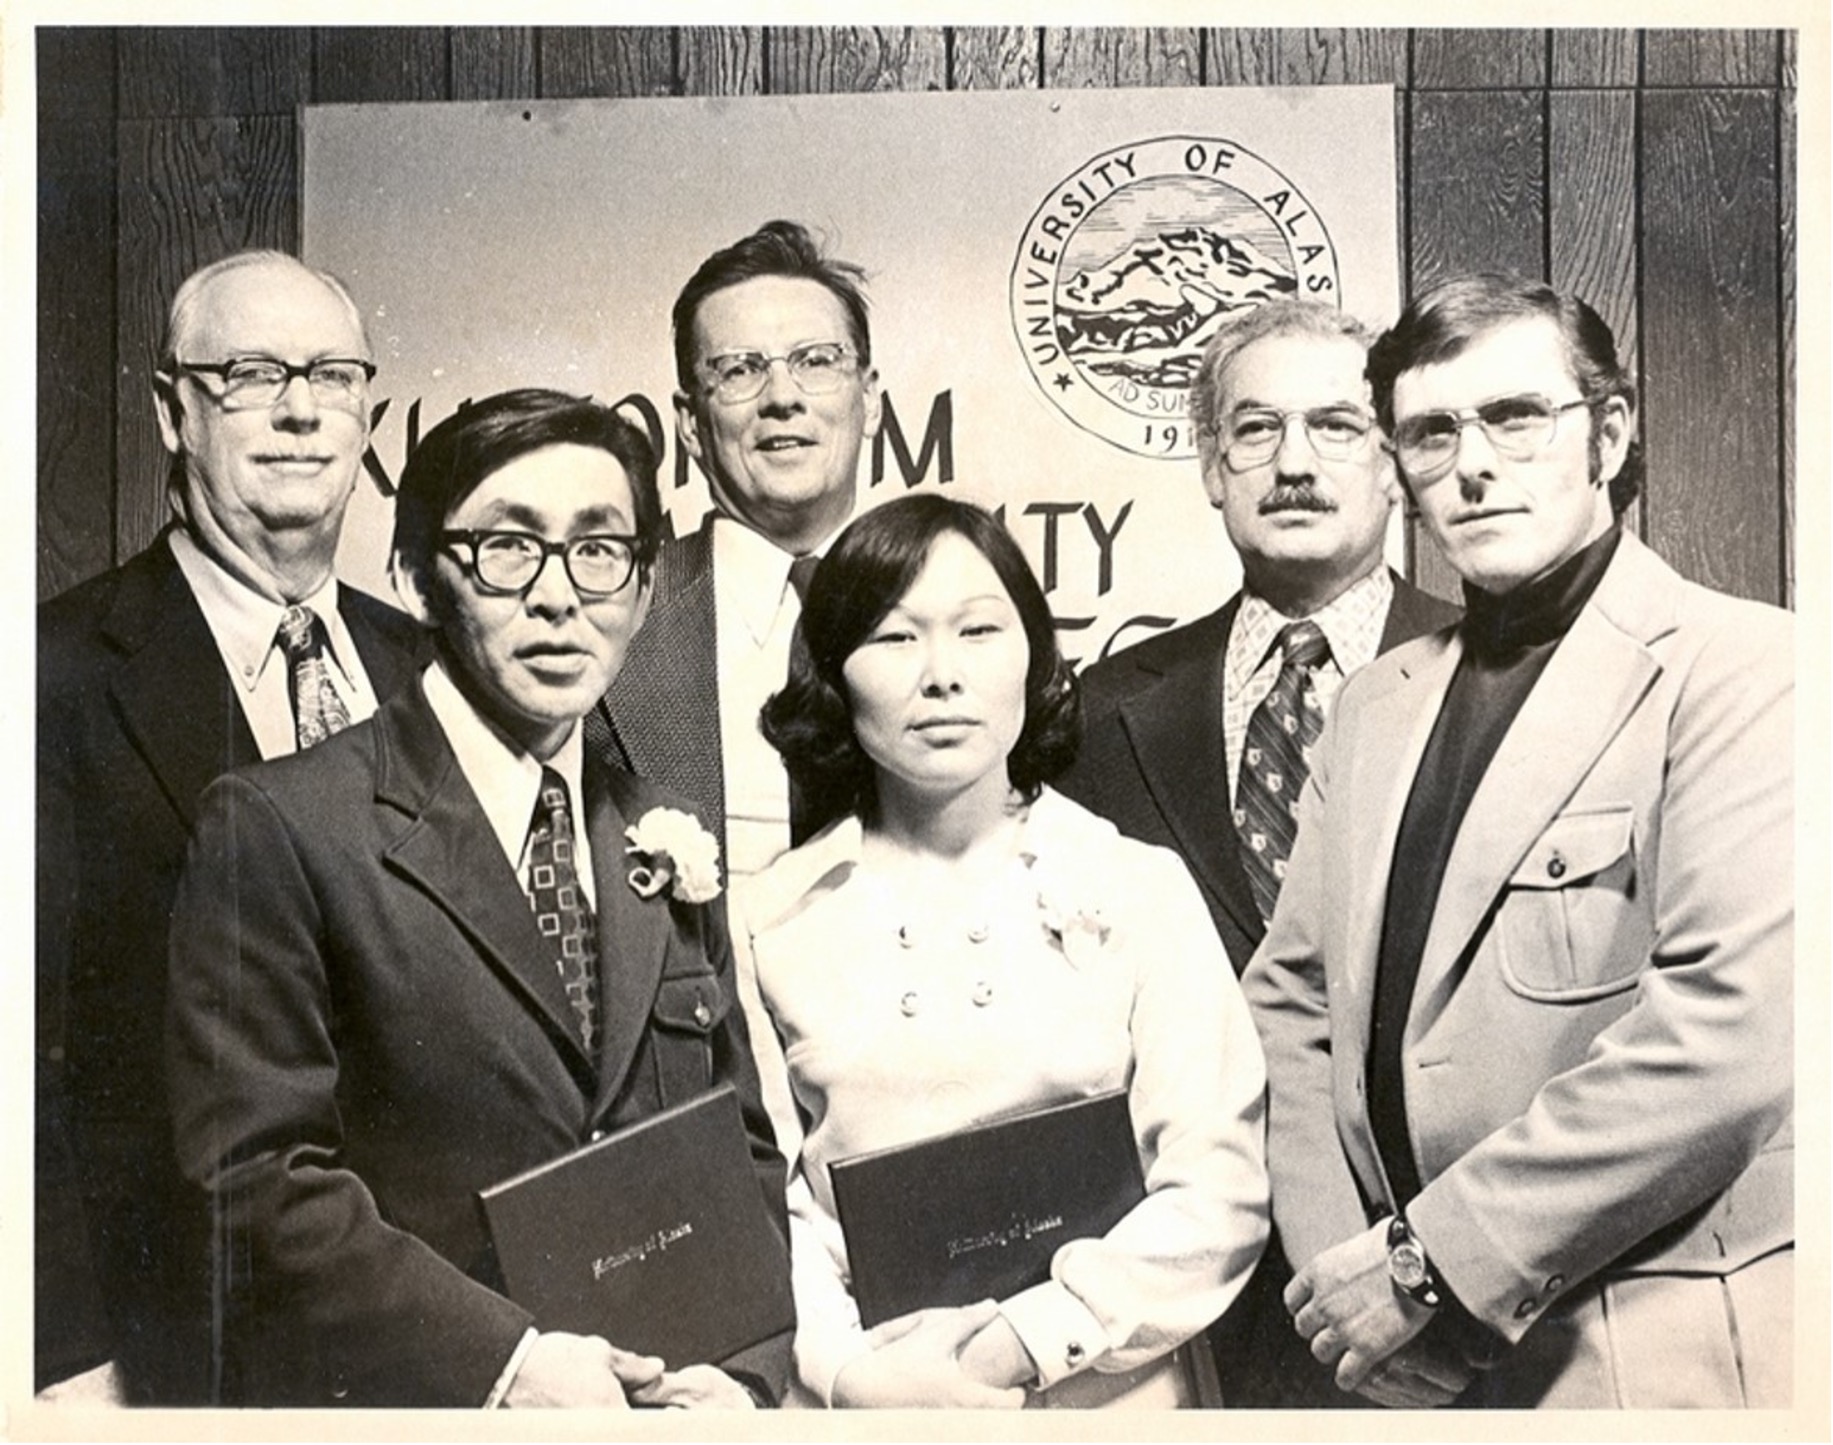 Black and white photo from 1975 of a group of people. A man and woman in the front row hold diplomas, with four men standing in a row behind them. The group is in front of a partially obscured banner showing the University of Alaska logo.